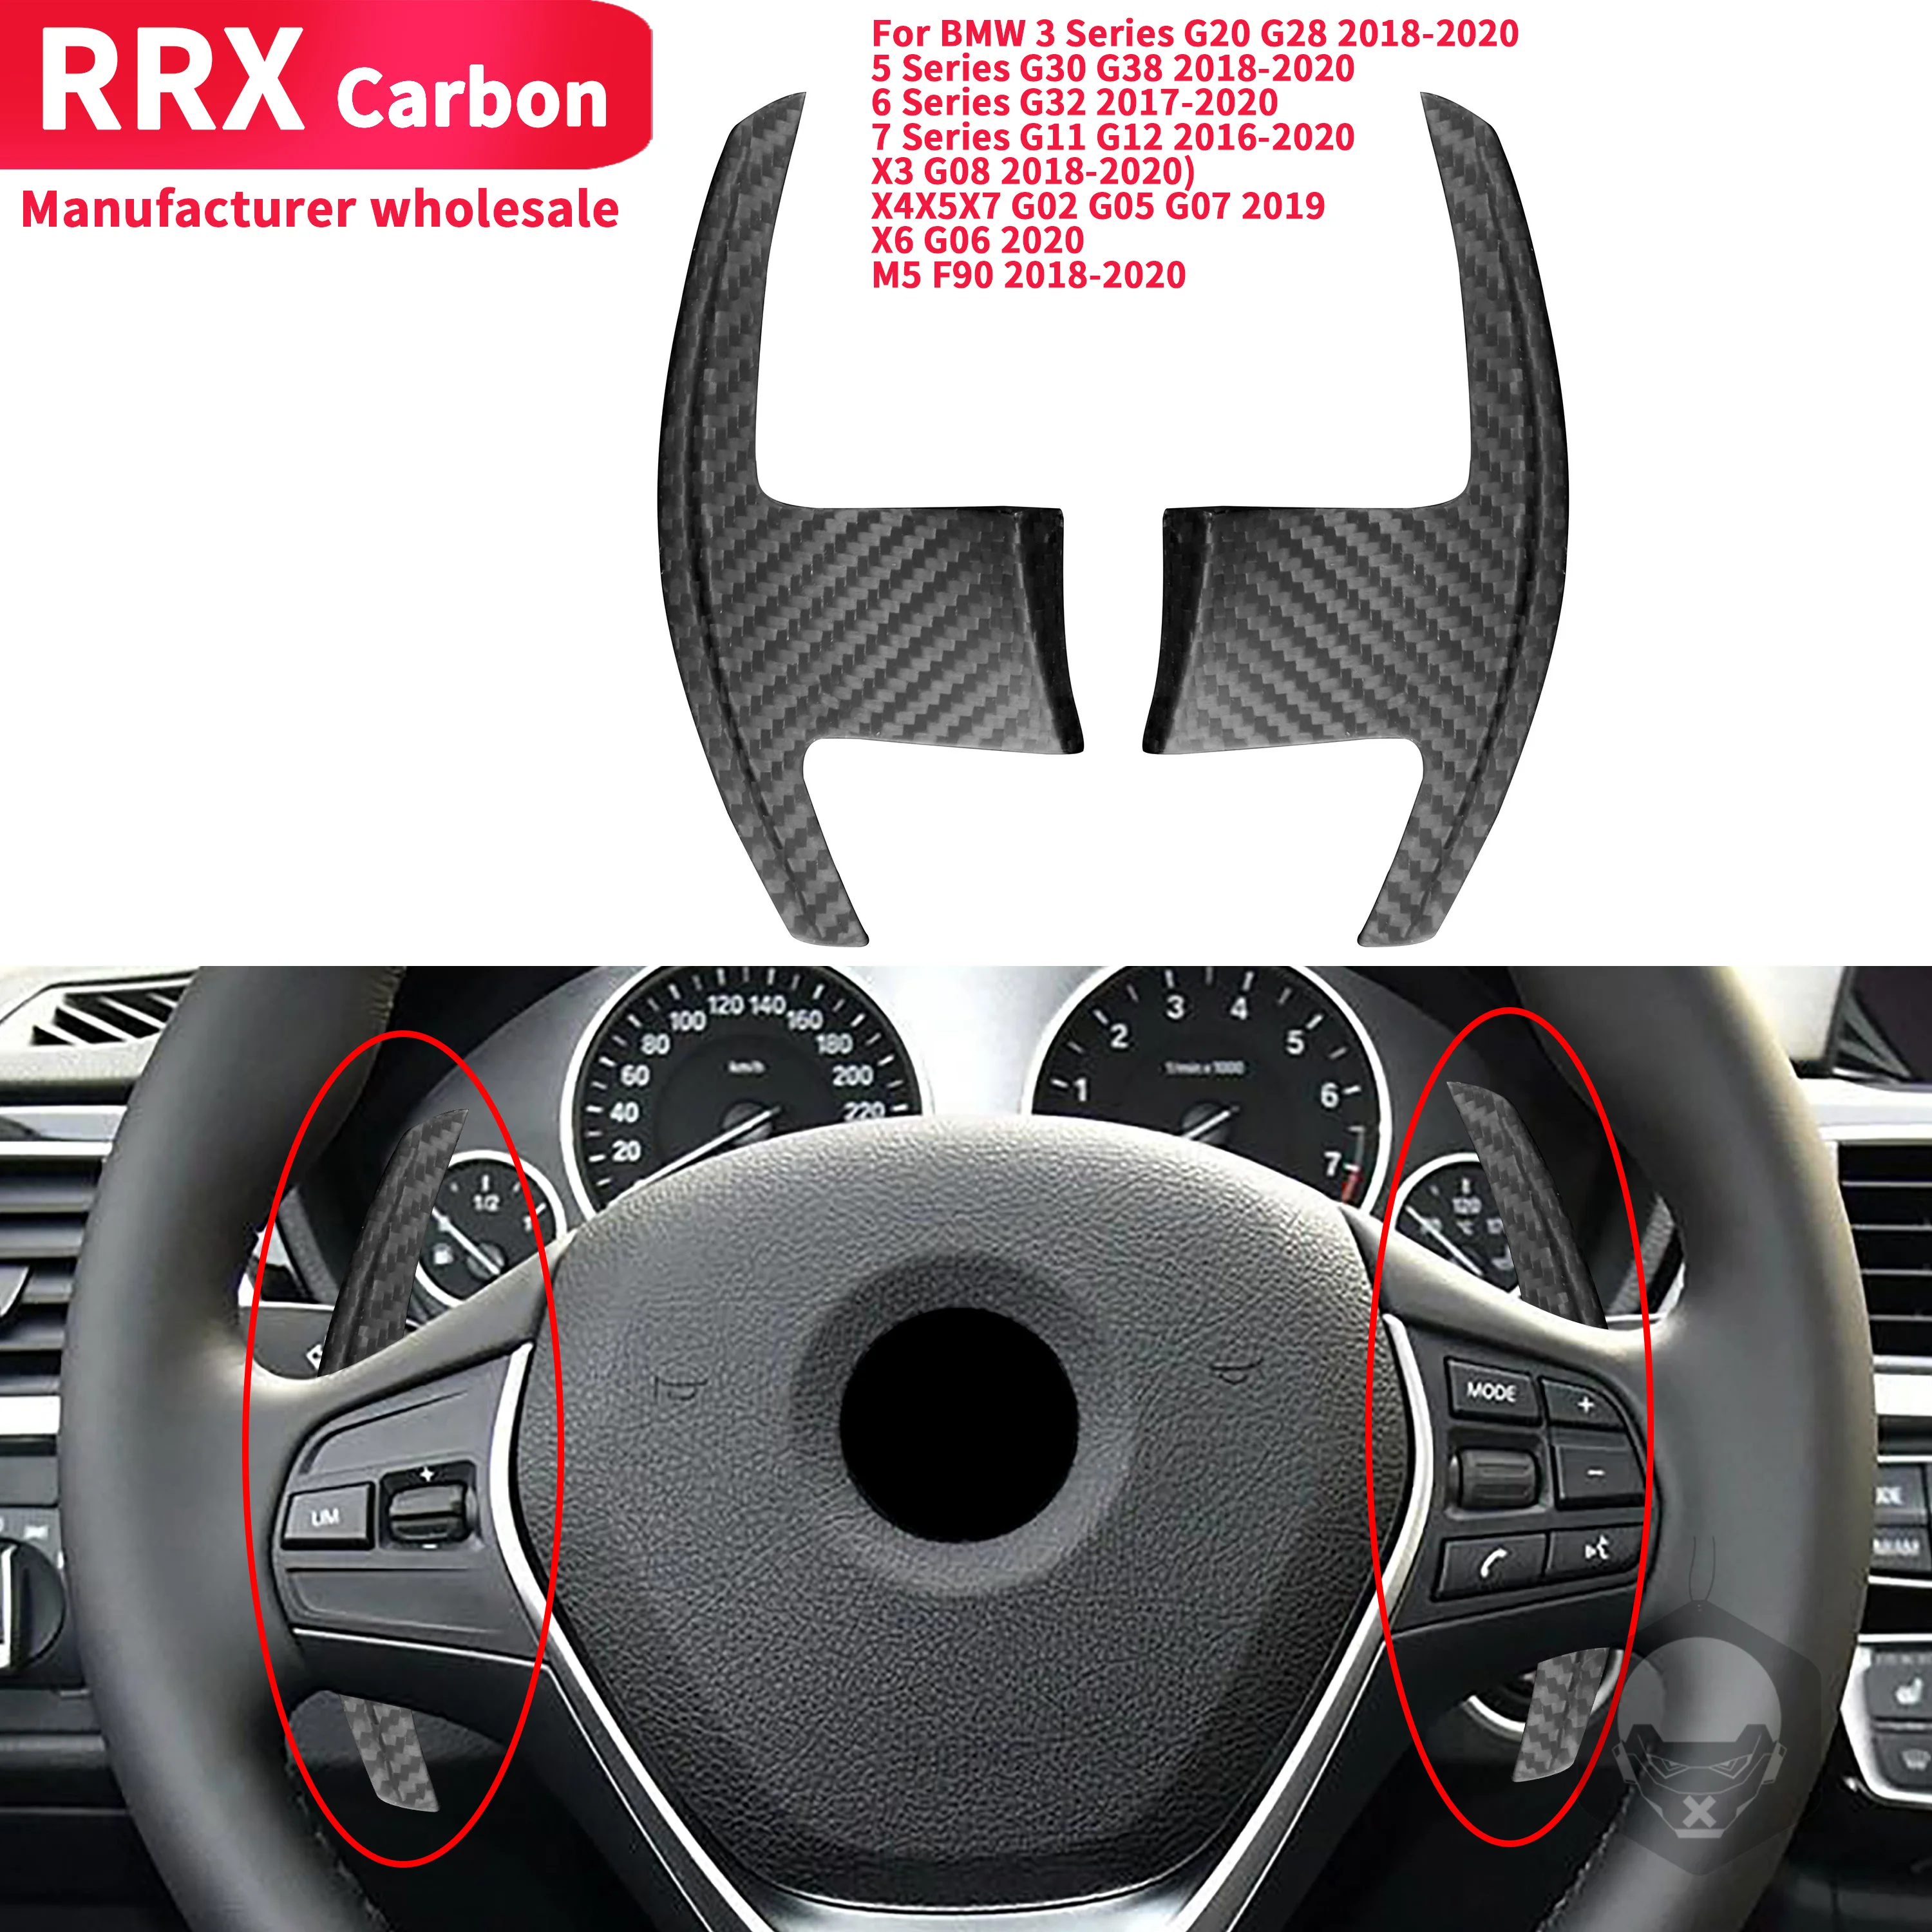 

For Bmw M5 F90 Carbon Fiber Paddle Shifter G20 G28 G30 G38 G32 G11 G12 G08 G02 G05 G07 Steering Wheel Extension Replacement